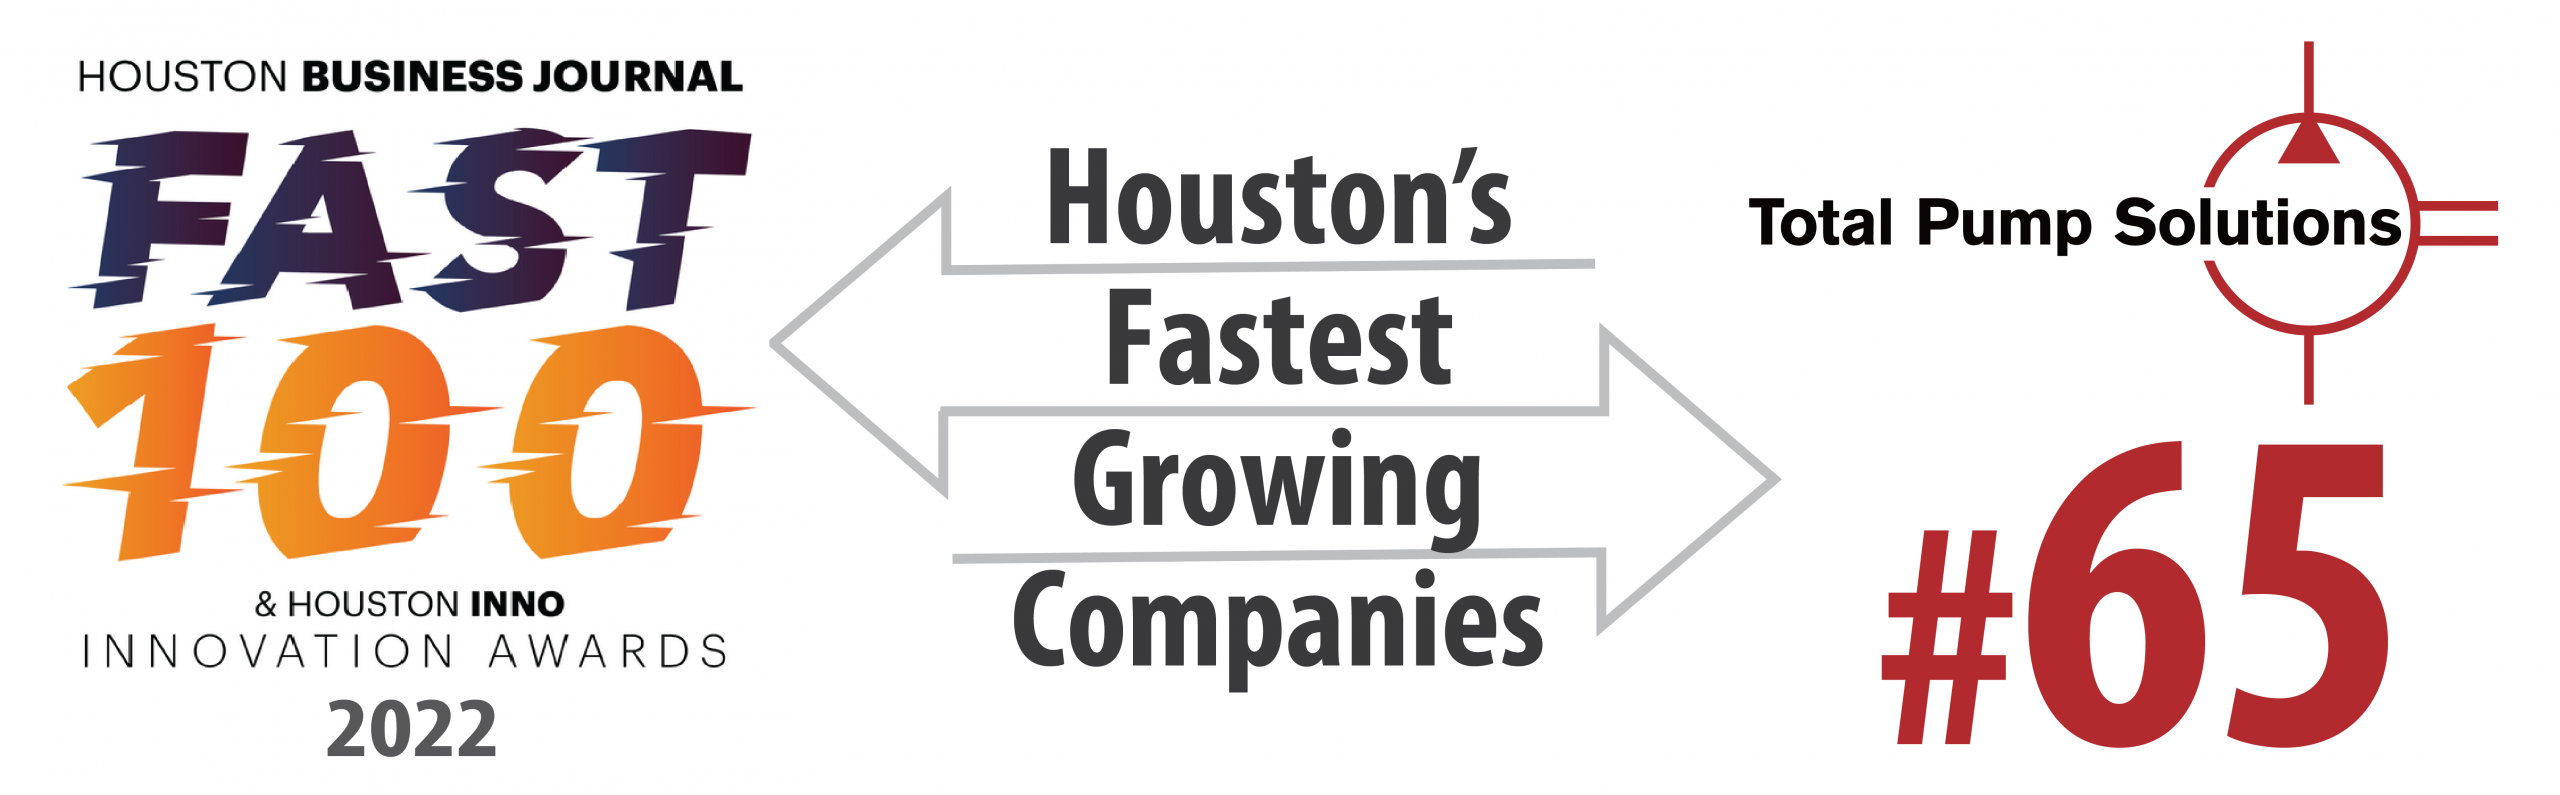 Total Pump Solutions Recognized for the Third Consecutive Year on the 2022 Houston Business Journal Fast 100